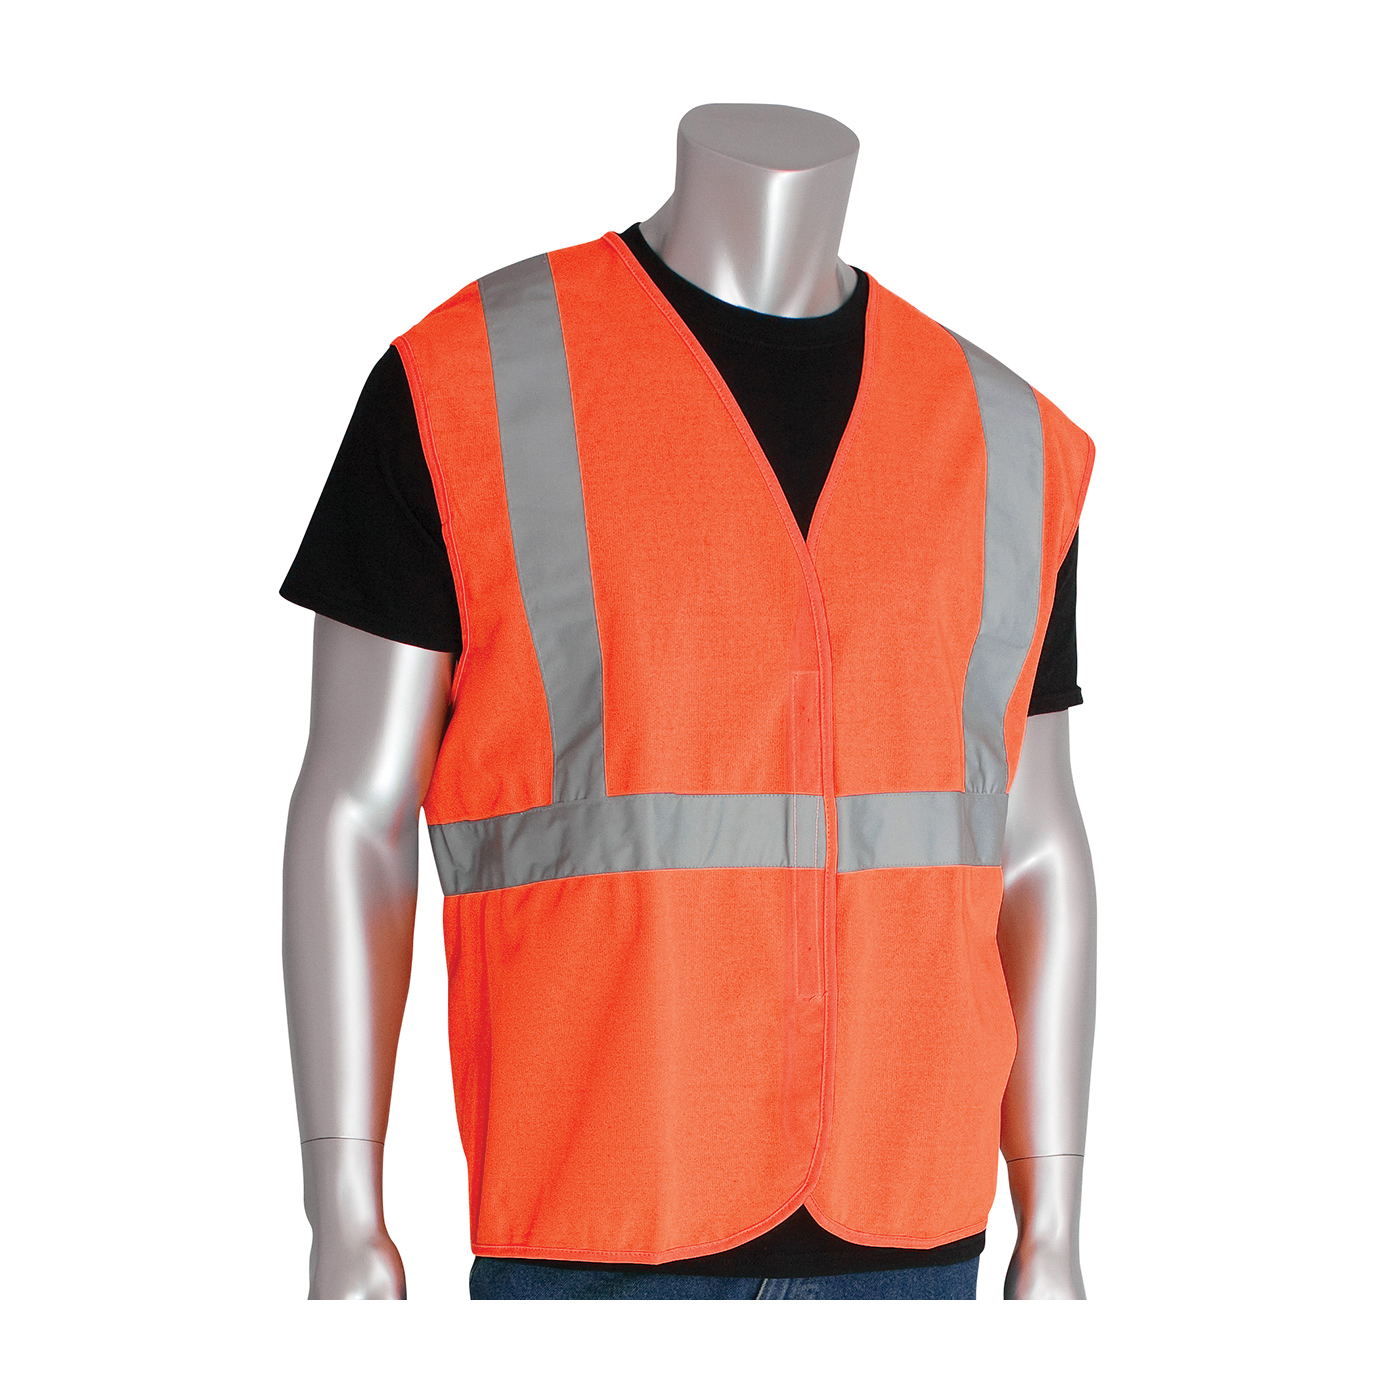 PIP® 302-WCENGOR-5X Solid Vest, 5XL, Hi-Viz Orange, Polyester, Hook and Loop Closure, ANSI Class: Class 2, Specifications Met: ANSI 107 Type R